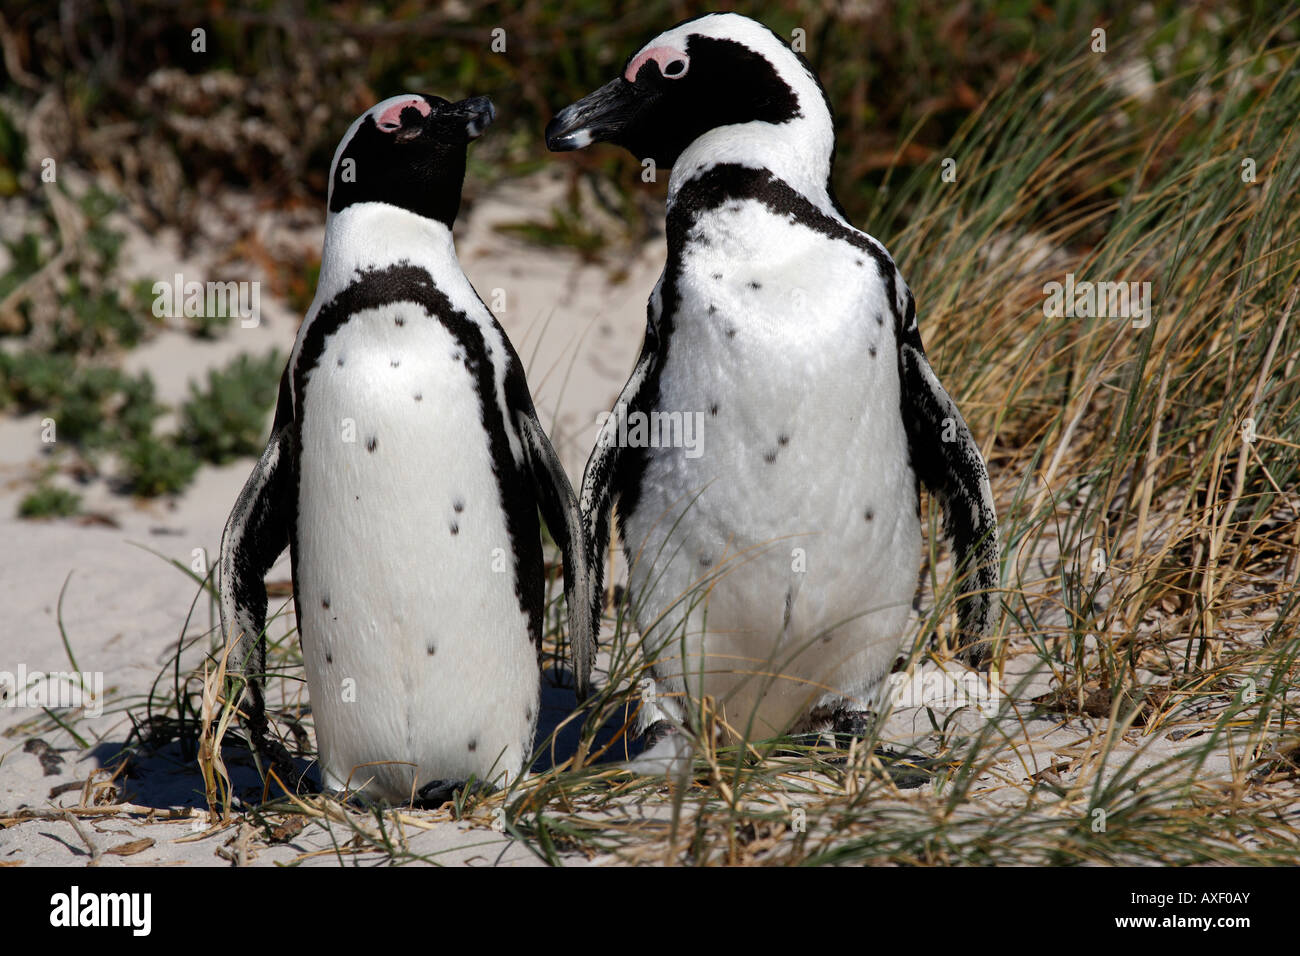 african penguin spheniscus demersus near boulders beach on the false bay cape town western cape province south africa Stock Photo